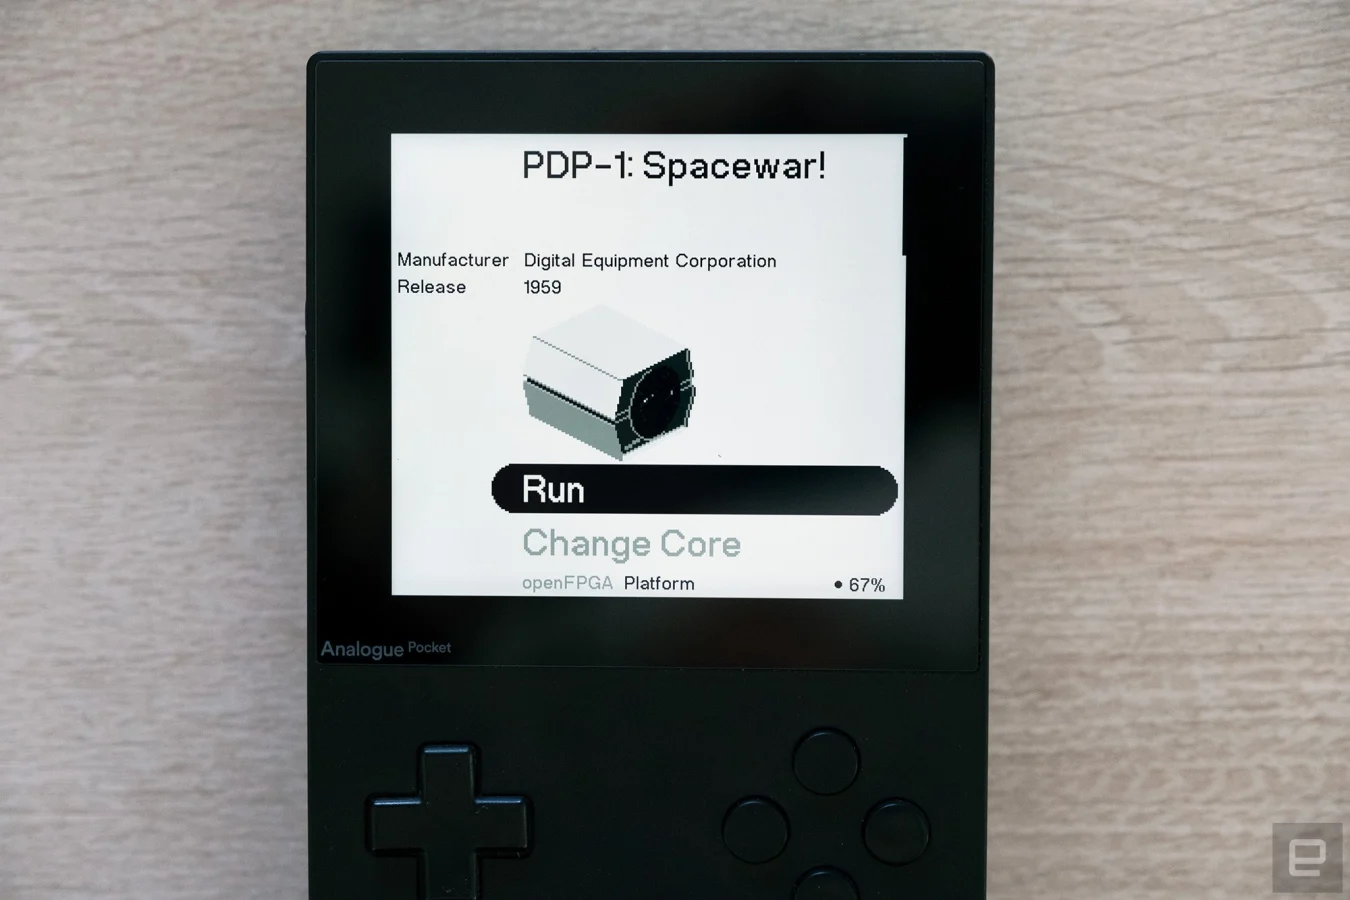 The Analog Pocket gaming handheld with the first 3rd party developed core.  This core allows Pocket owners to play one of the first video games - Spacewar!